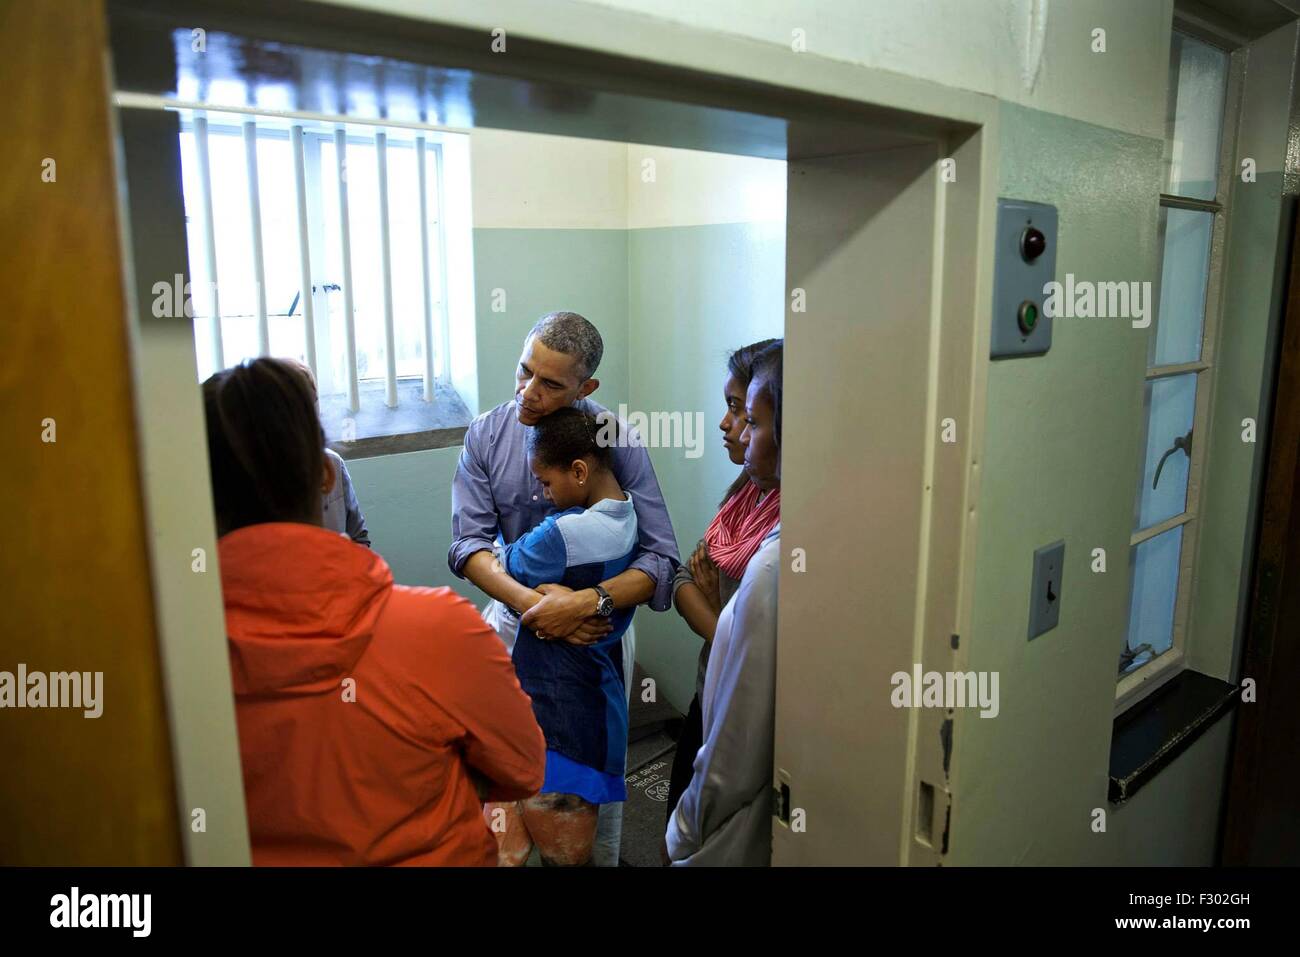 US President Barack Obama listens to former prisoner Ahmed Kathrada as he stands in former South African President Nelson Mandela's cell during a tour of Robben Island Prison on Robben Island June 30, 2013 in Cape Town, South Africa. Stock Photo